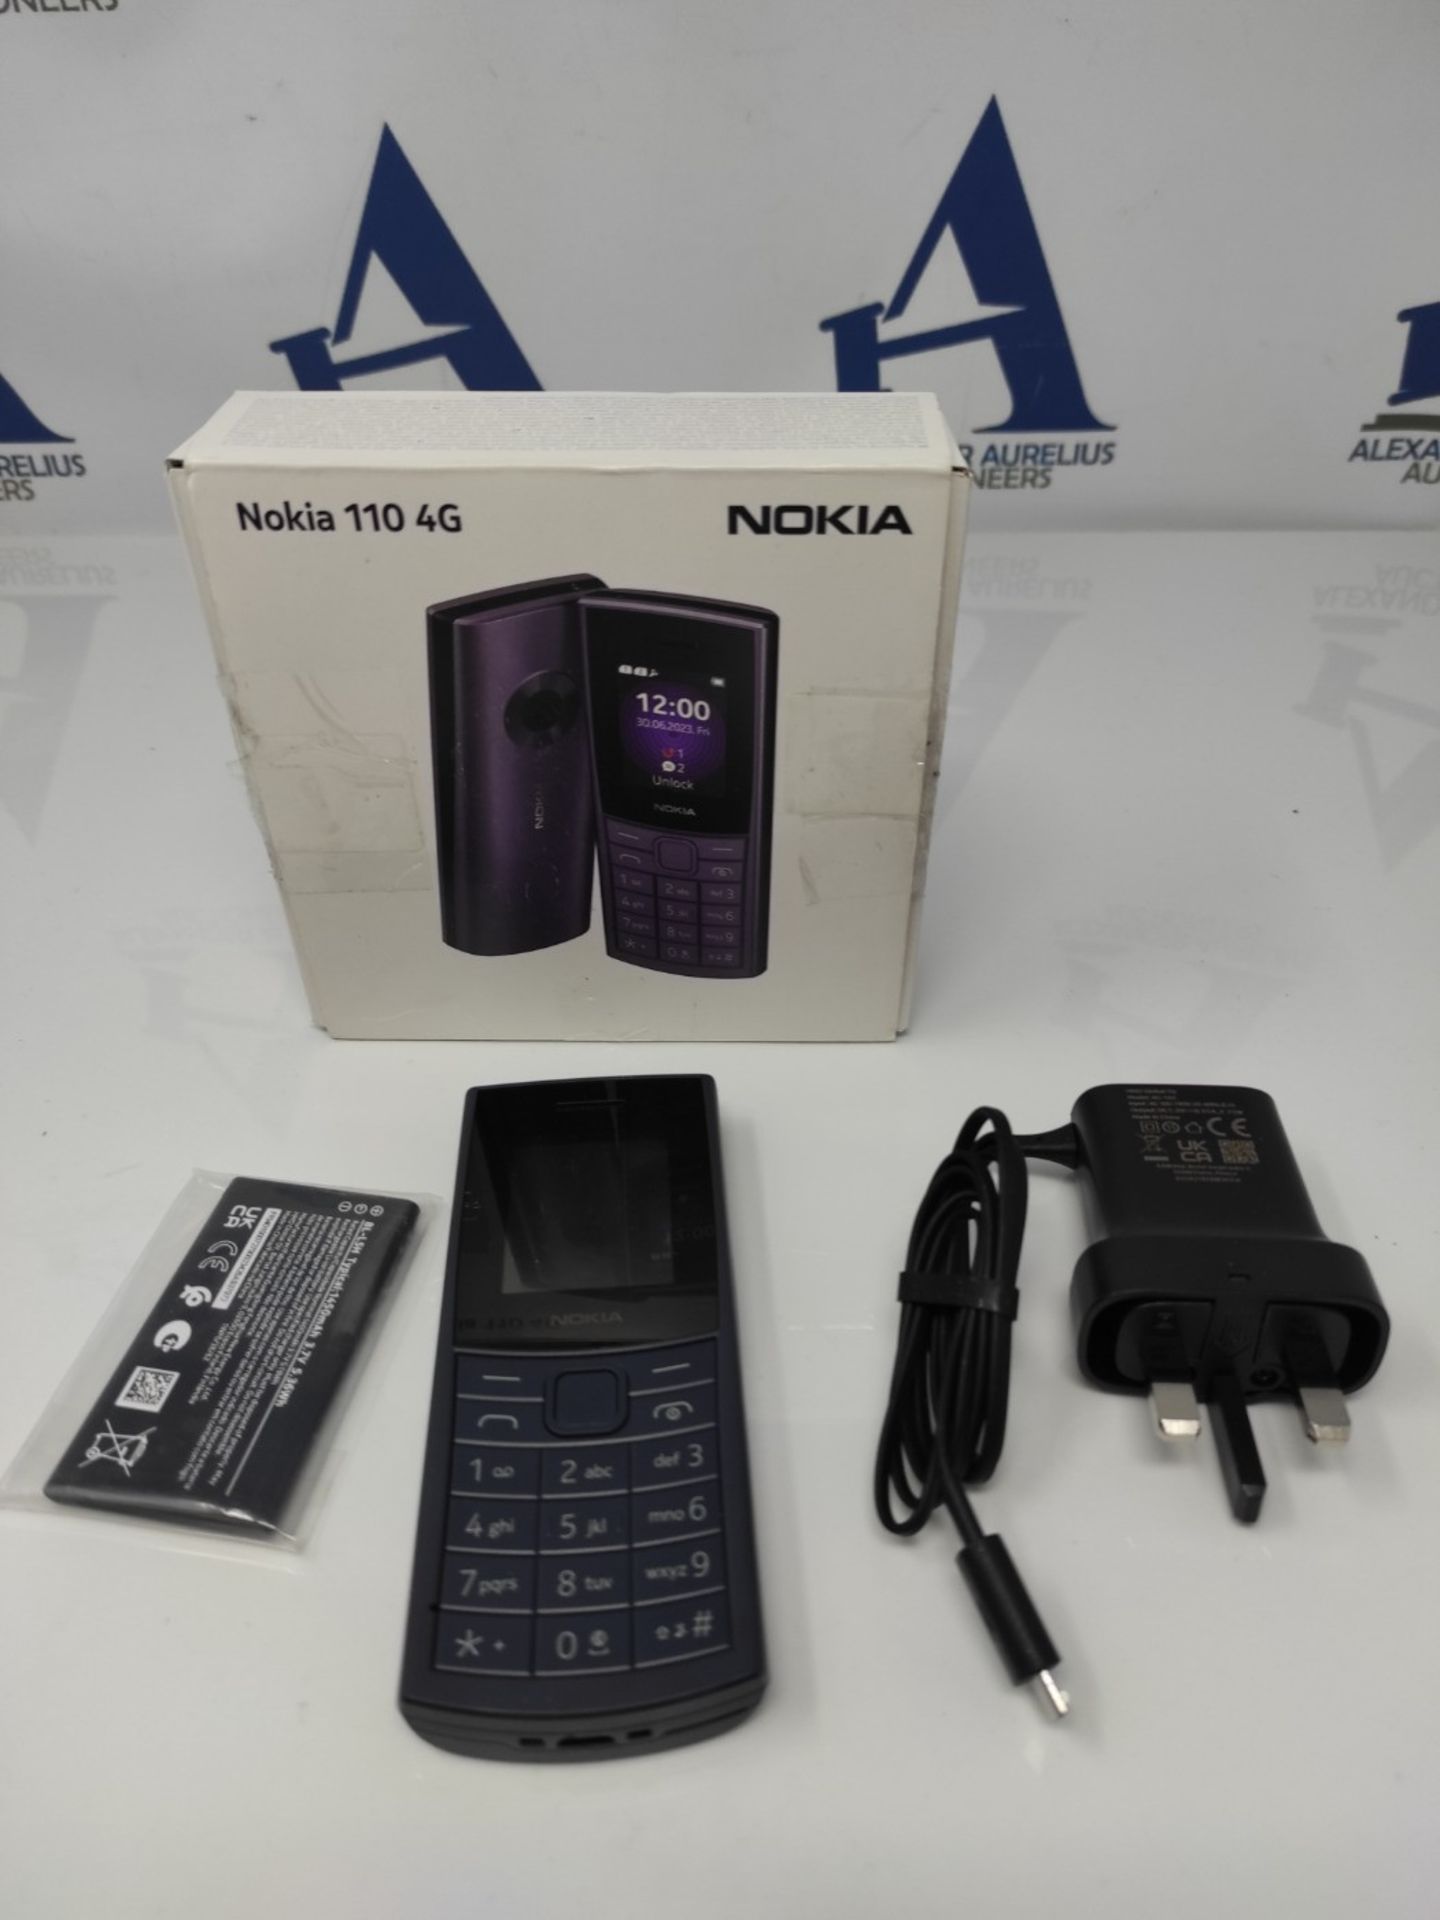 Nokia 110 4G Feature Phone with 4G, Camera, Bluetooth, FM radio, MP3 player, MicroSD, - Image 2 of 2